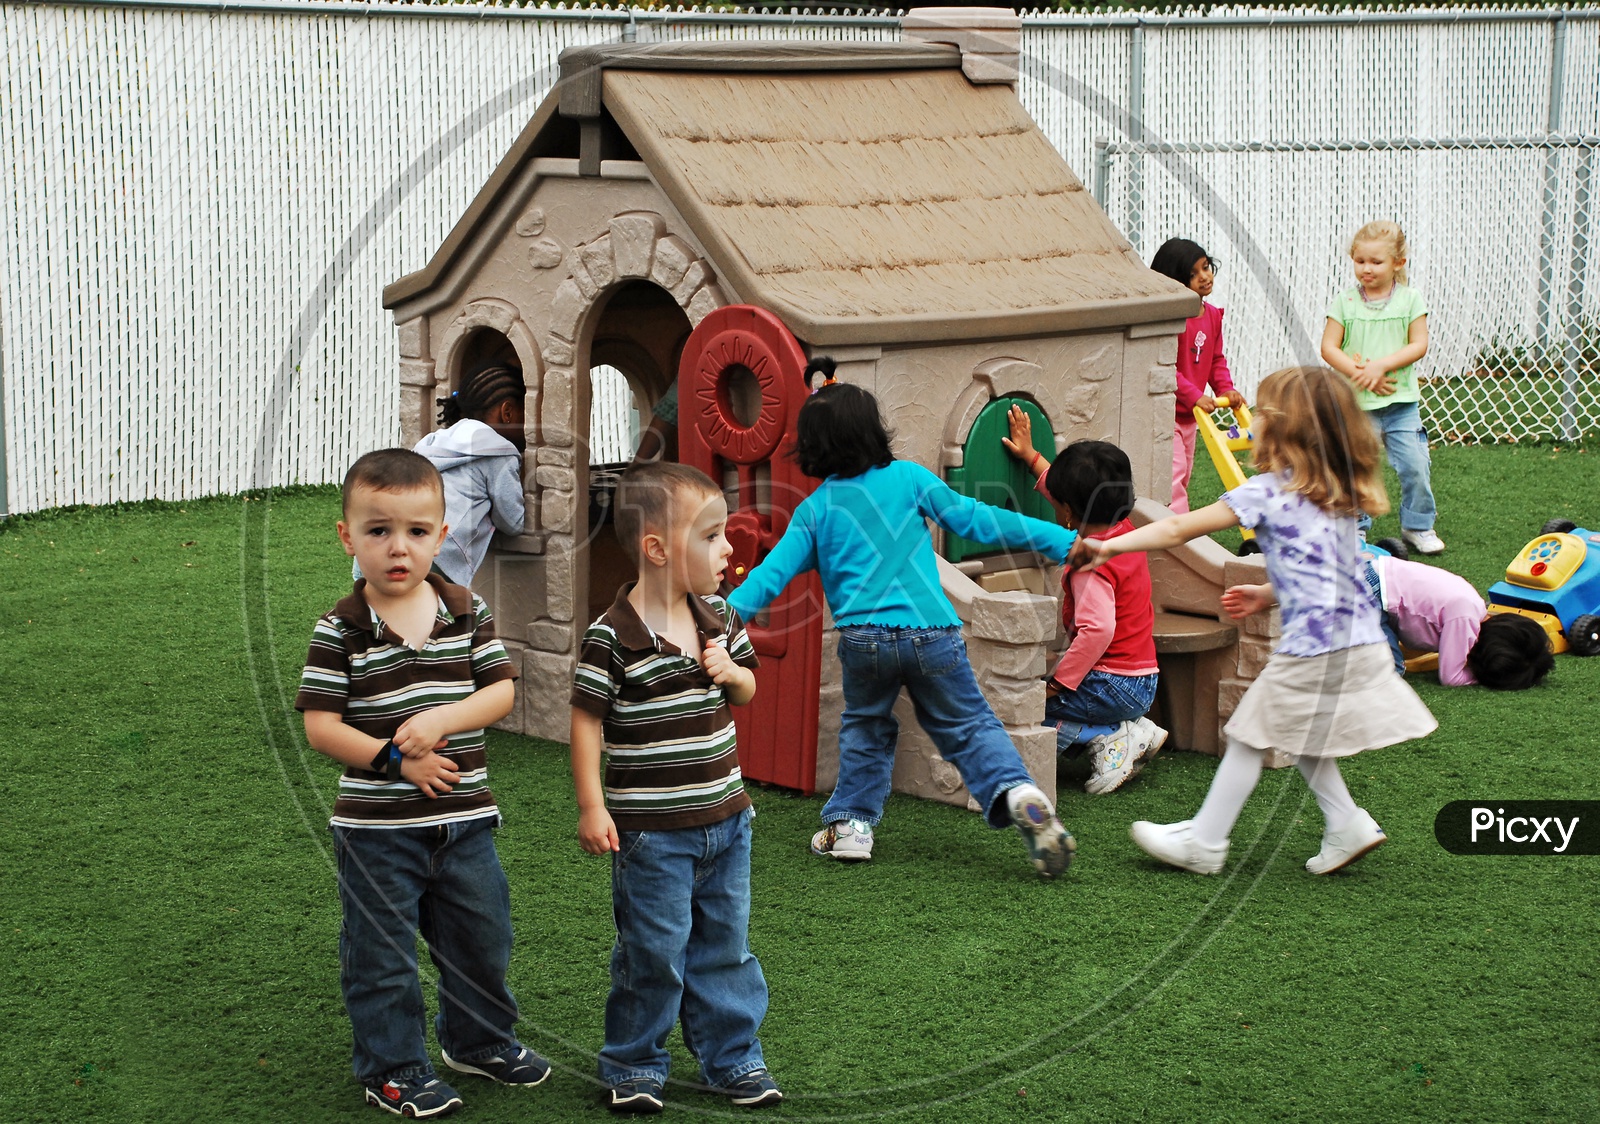 Kids Playing in a Kids In a Child Care Center o Kinder garden School